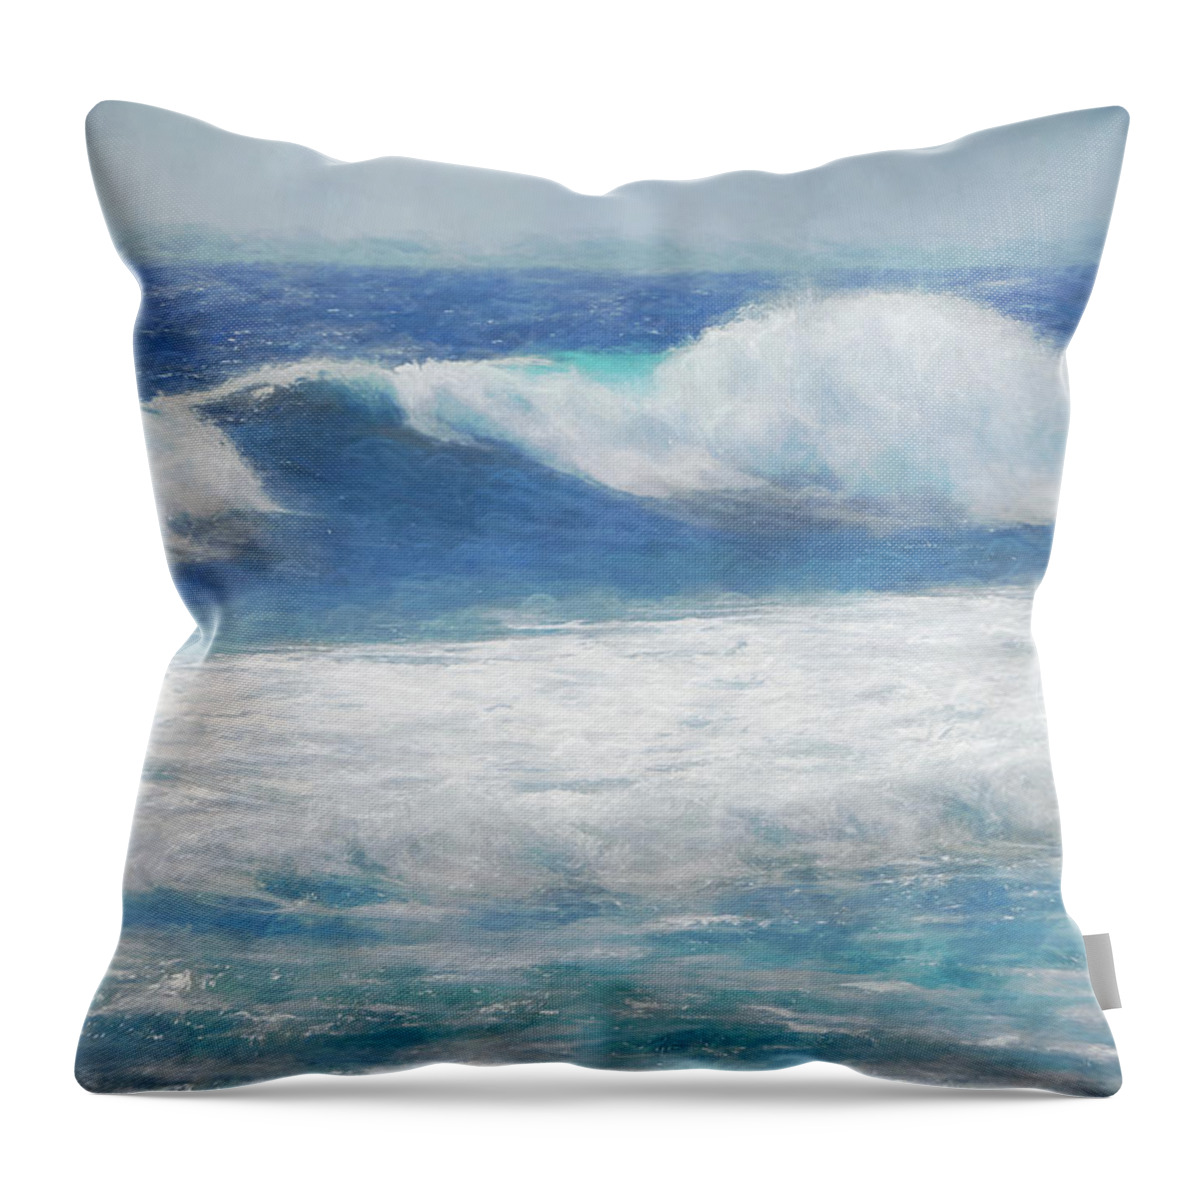 Holiday Throw Pillow featuring the mixed media Spanish Sea by Amanda Jane